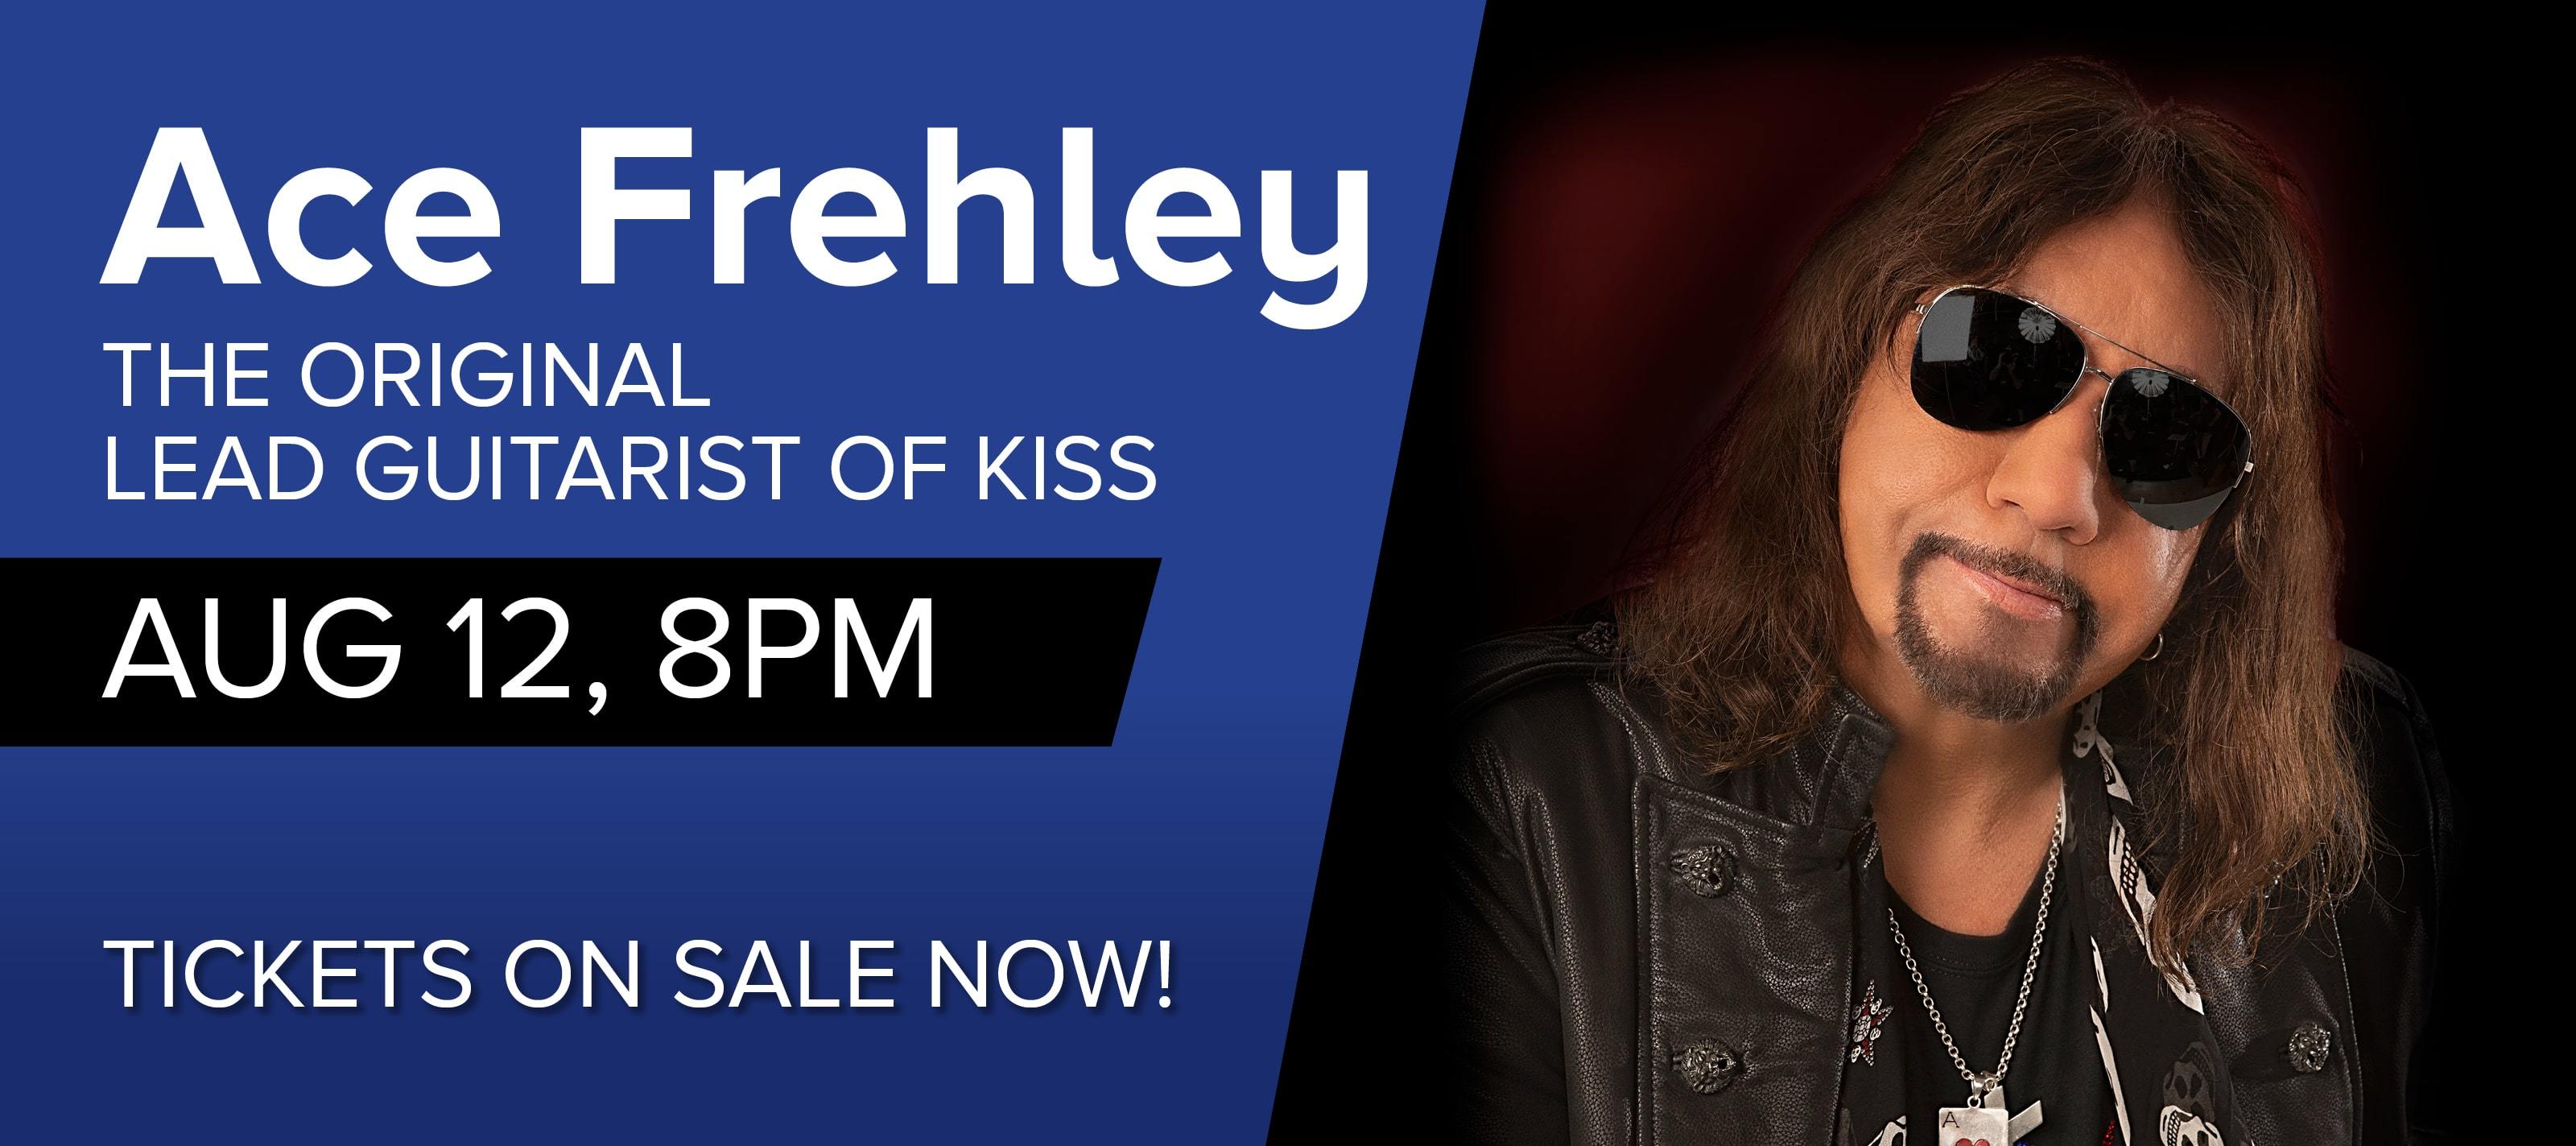 Headshot of Ace Frehley without KISS makeup, wearing black sunglasses.  Text:  Ace Frehley the Original Lead Guitarist of KISS.  August 12 at 8pm.  Tickets on sale now.